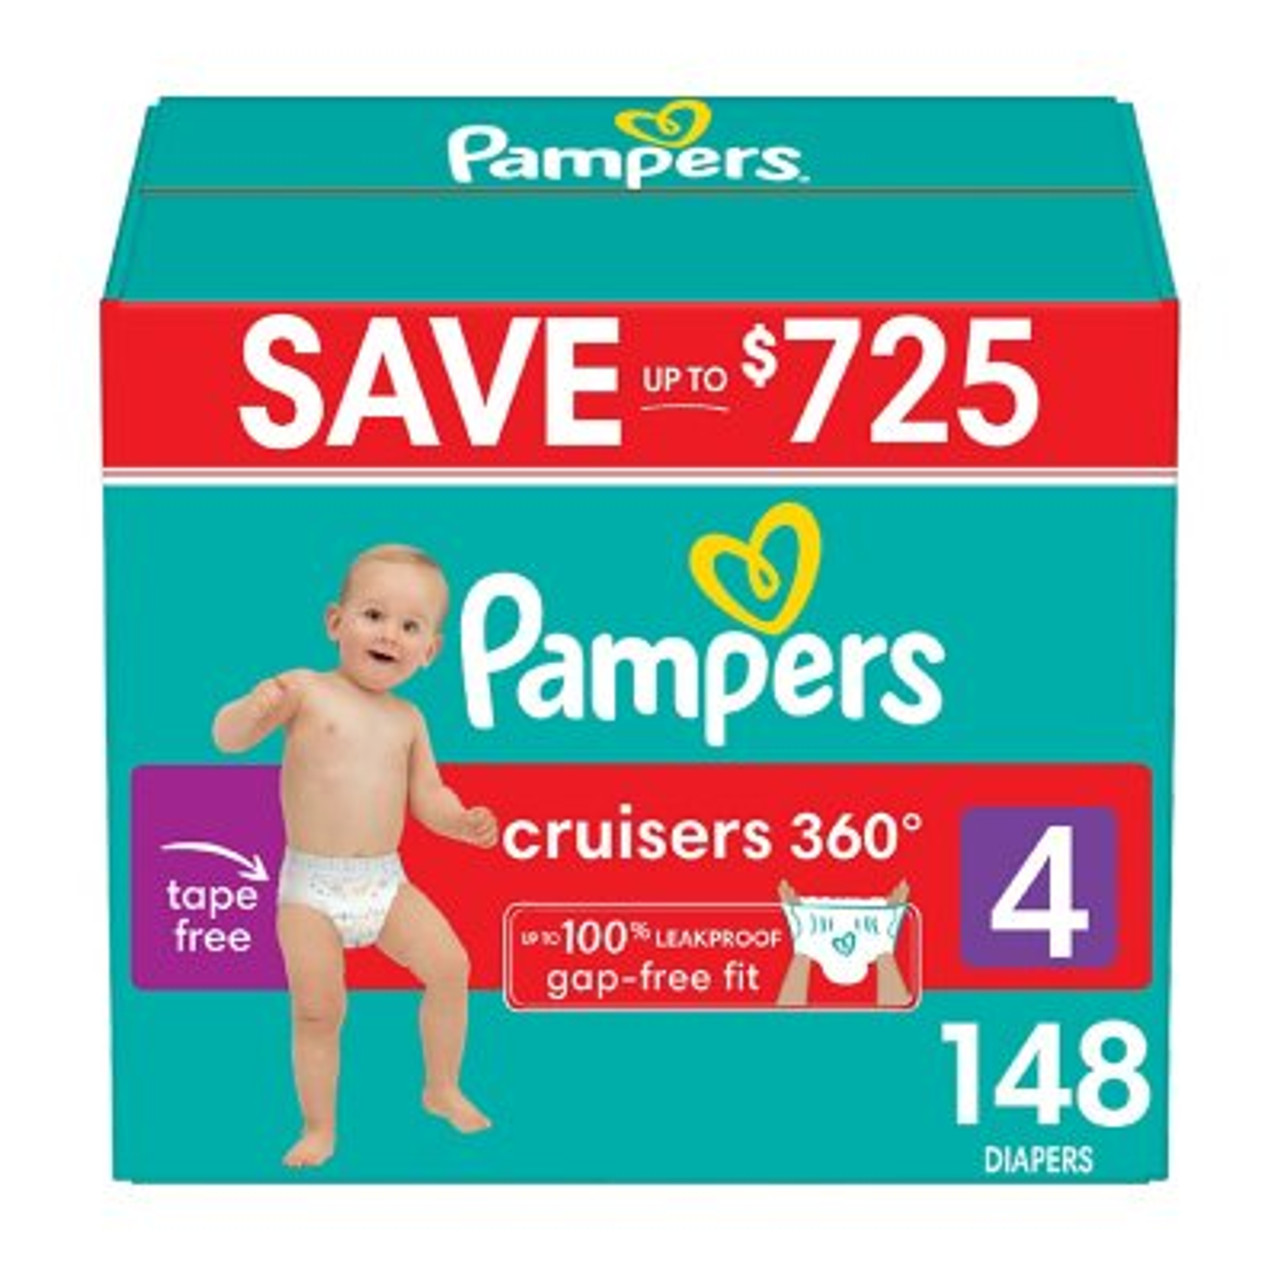 Pampers Cruisers 360 Diapers Gap-Free Fit Size 4 - 148 ct. (22-37 lbs.) - *Pre-Order